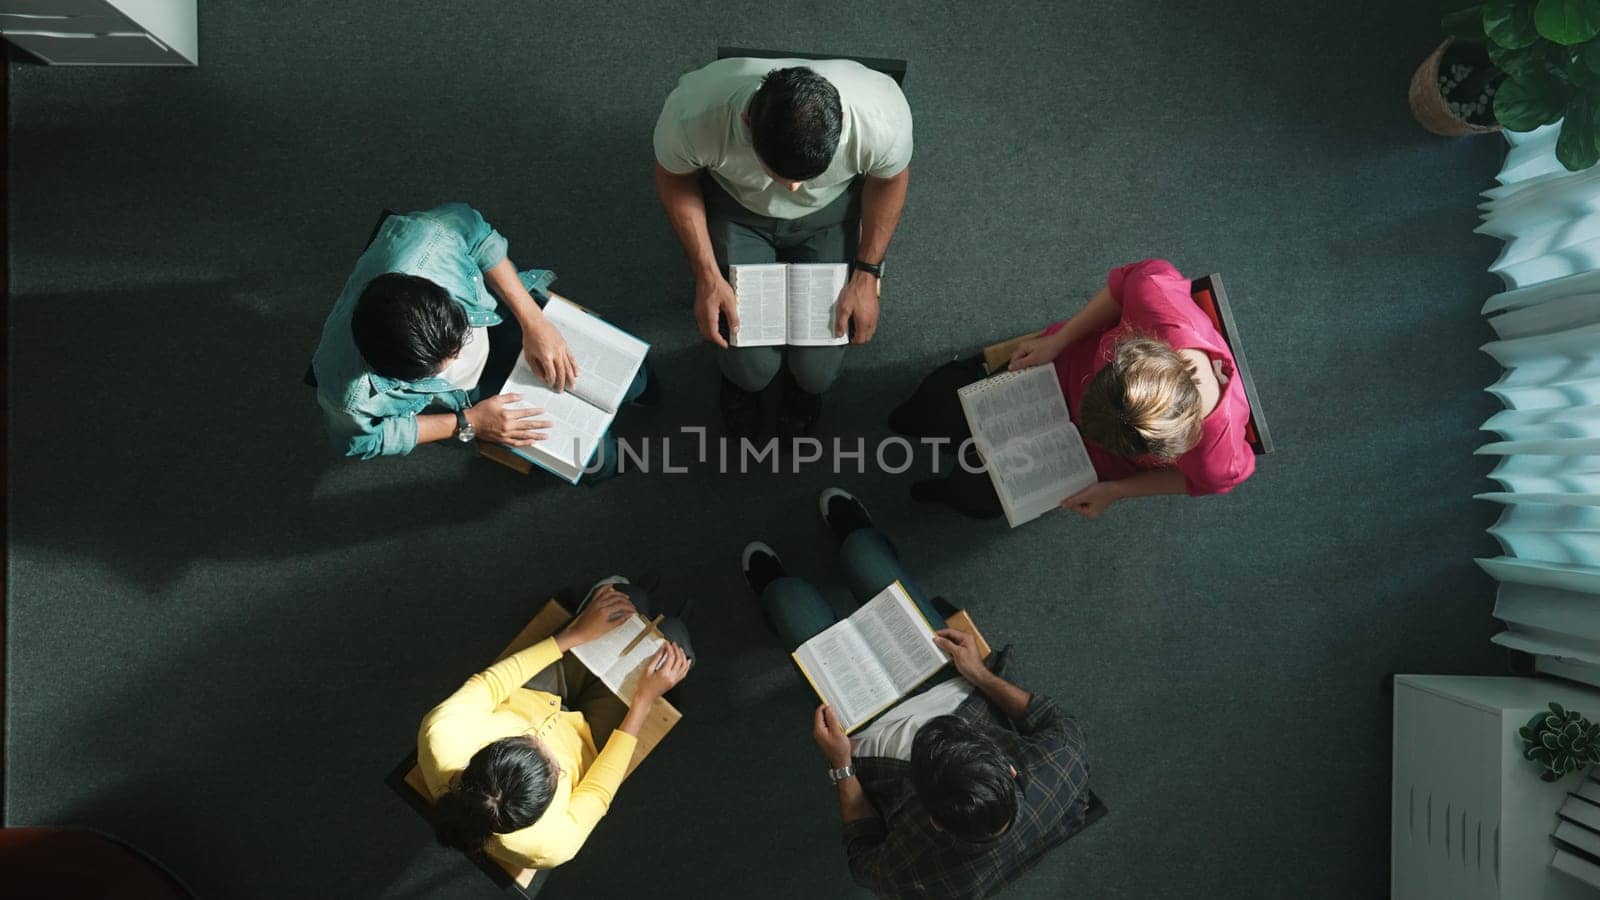 Top down view of prayer reading at bible book and sitting in circle with bible book on laps. Aerial view of diverse people looking at book while studying with faith, trust and hope, calm. Symposium.